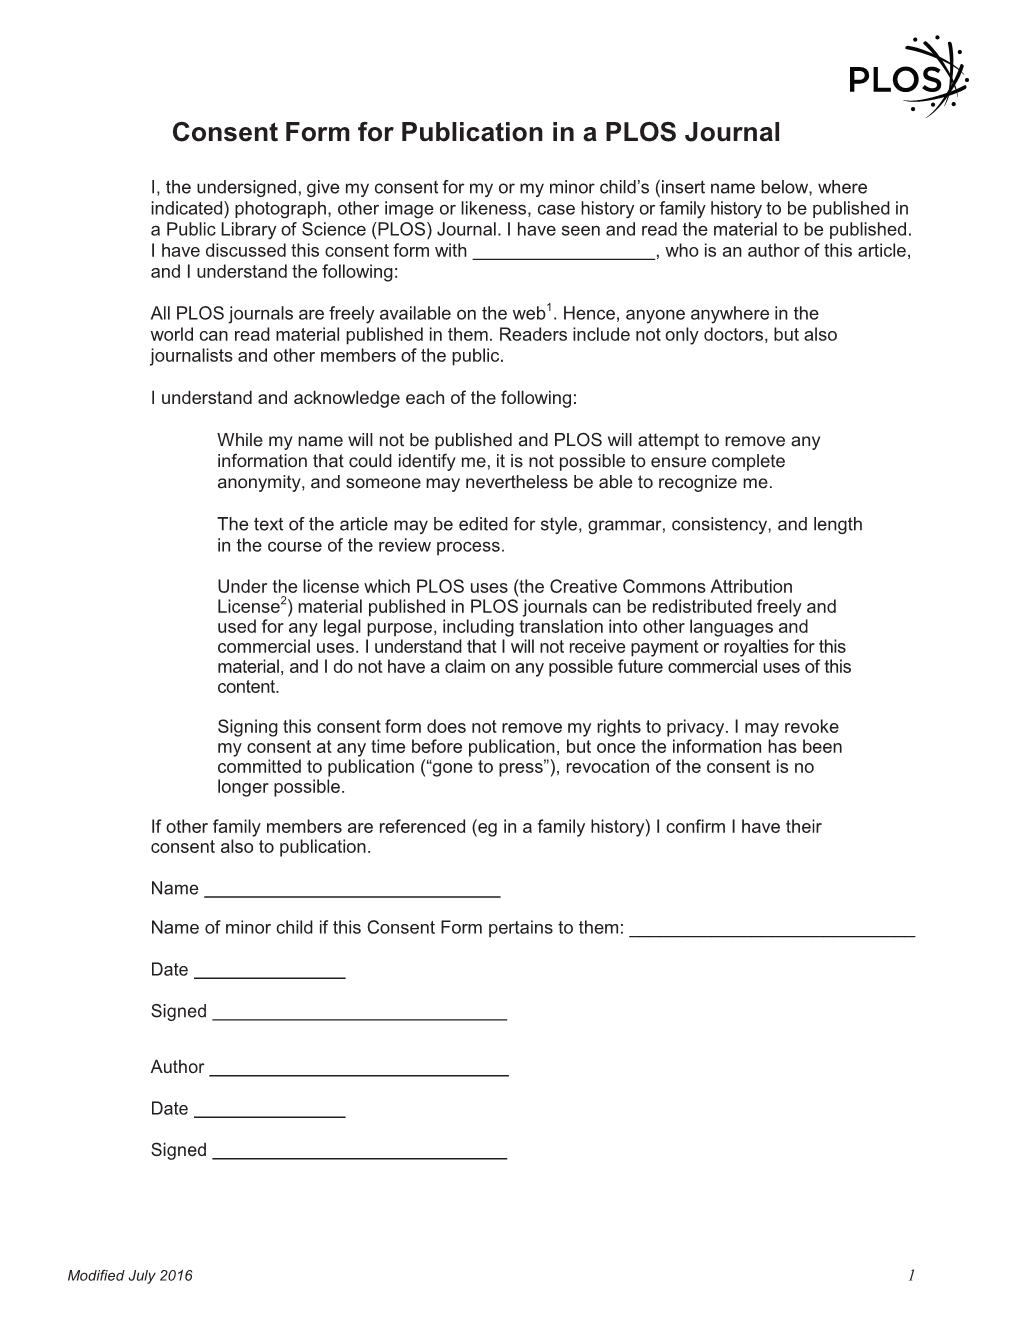 Consent Form for Publication in a PLOS Journal